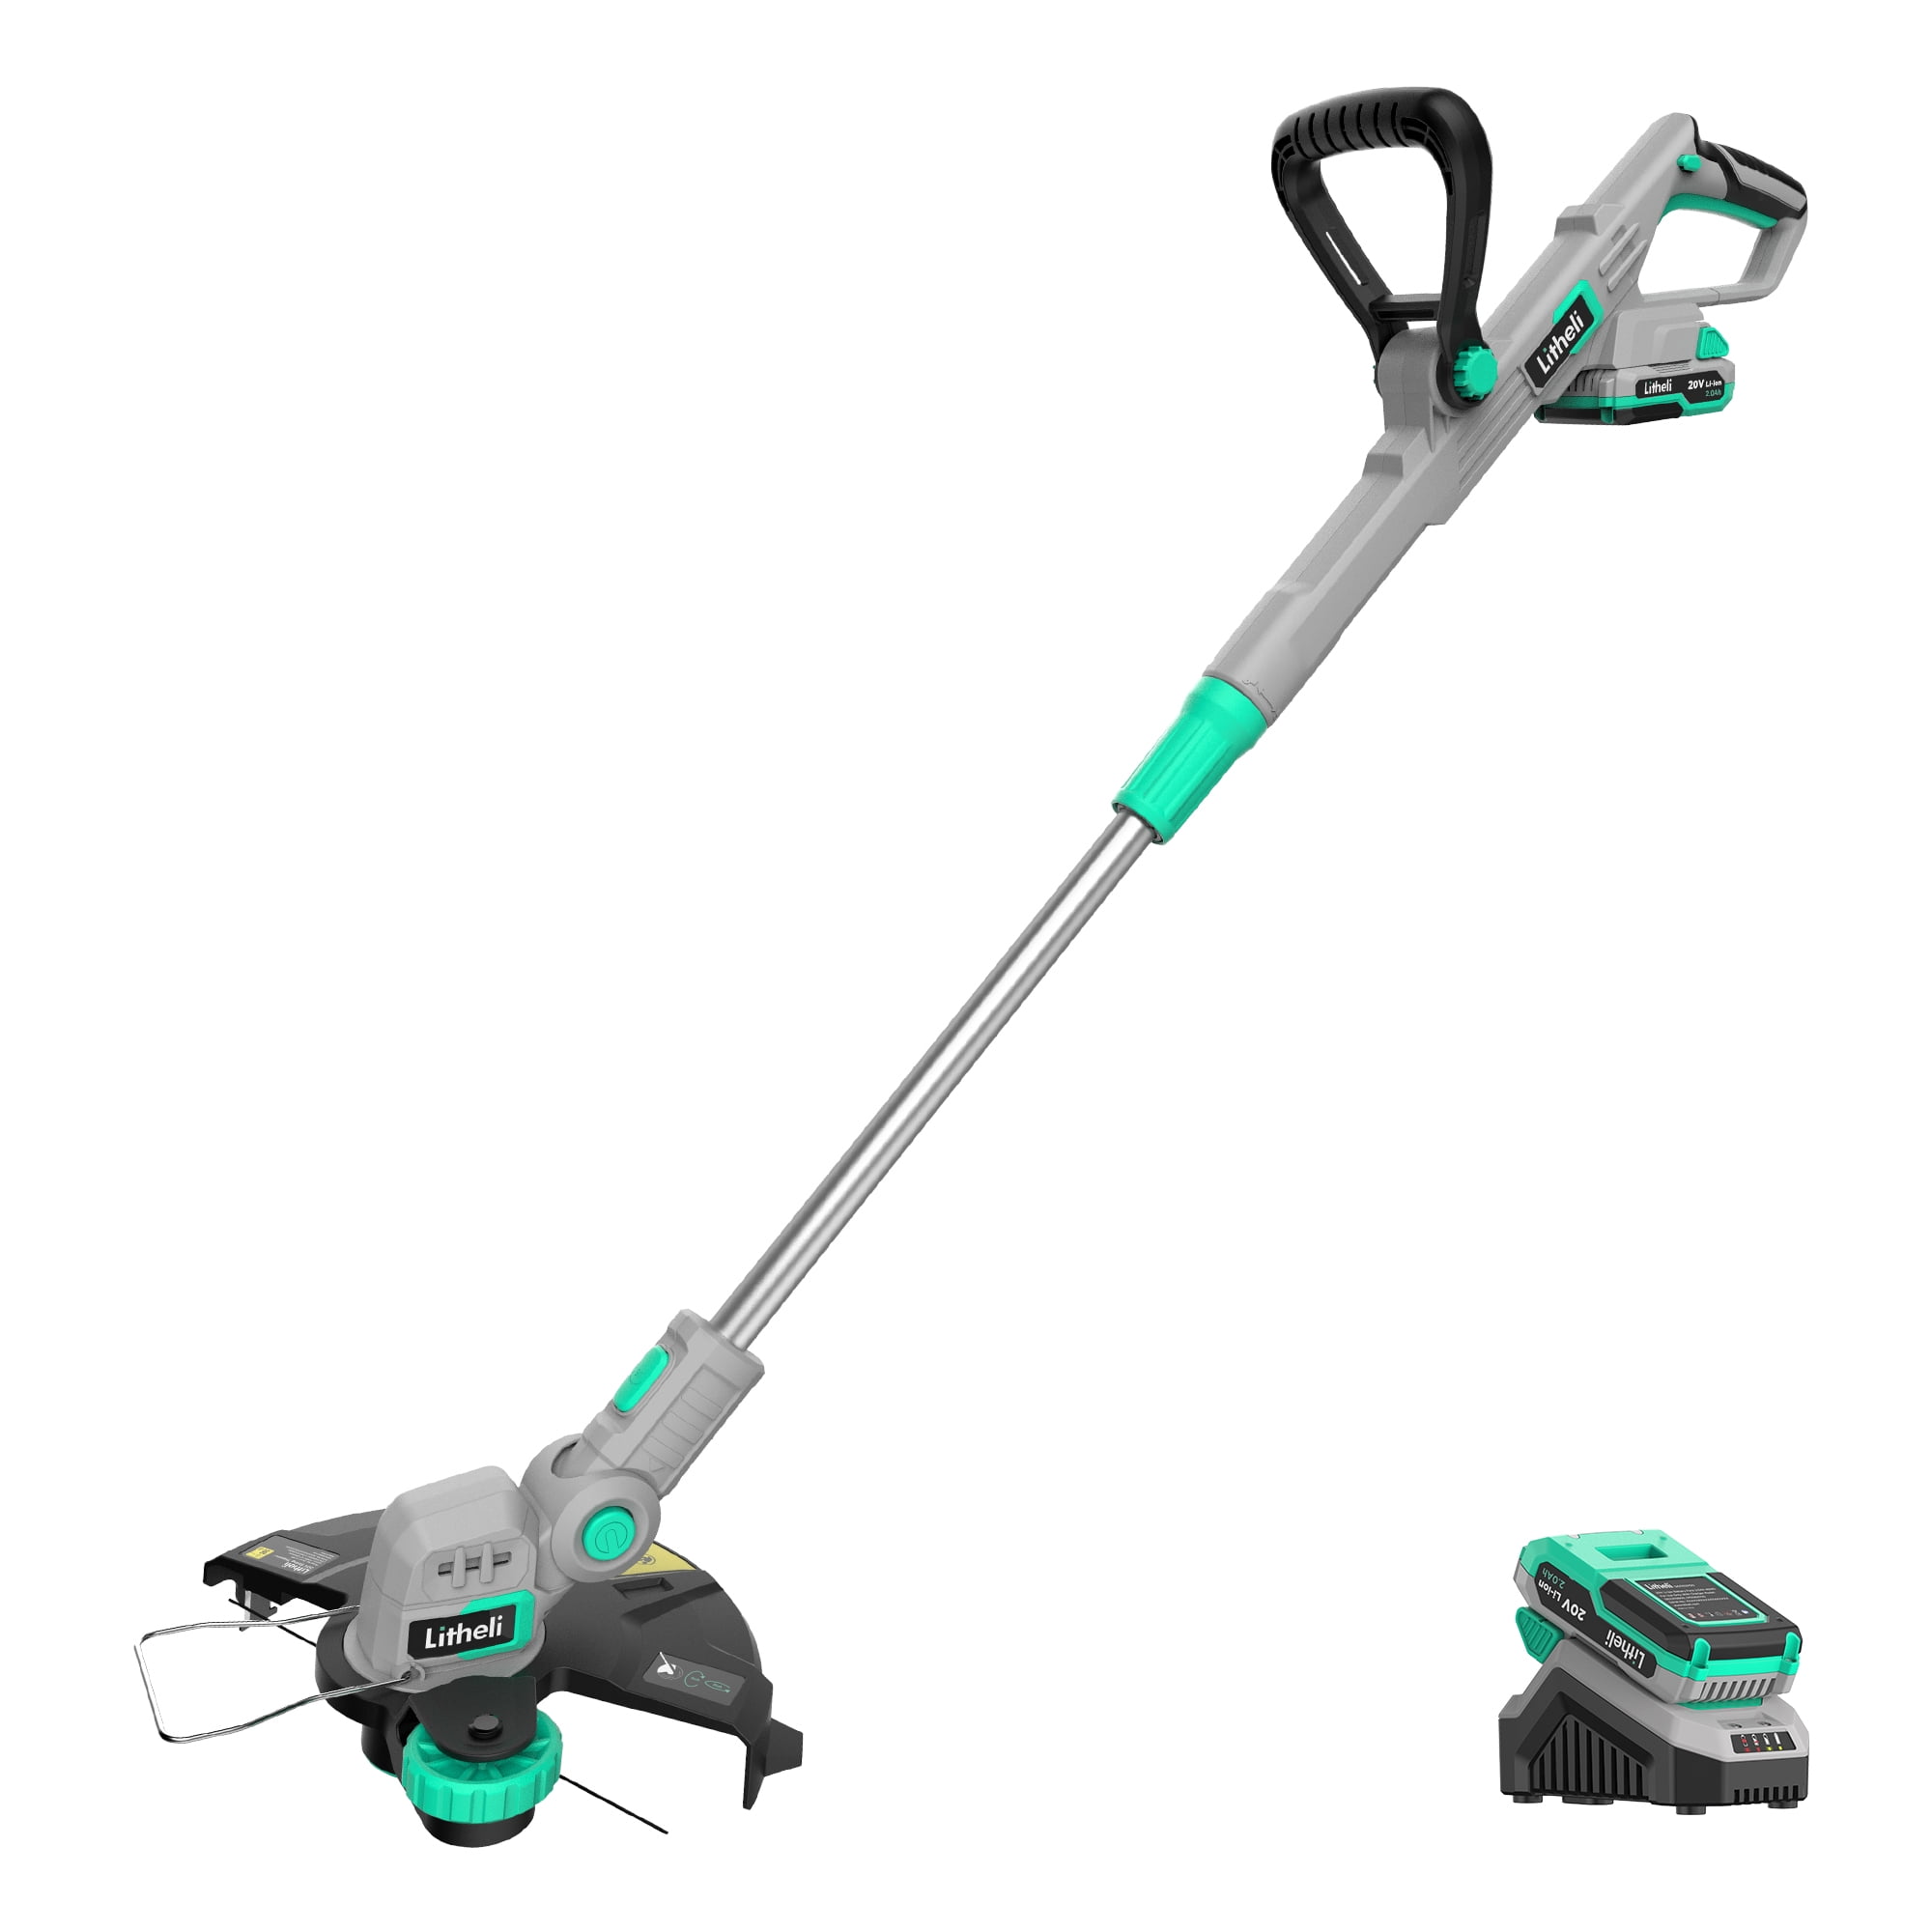 Litheli 12" Cordless String Trimmer, Battery Powered Grass Trimmer & Wheeled with Battery and - Walmart.com